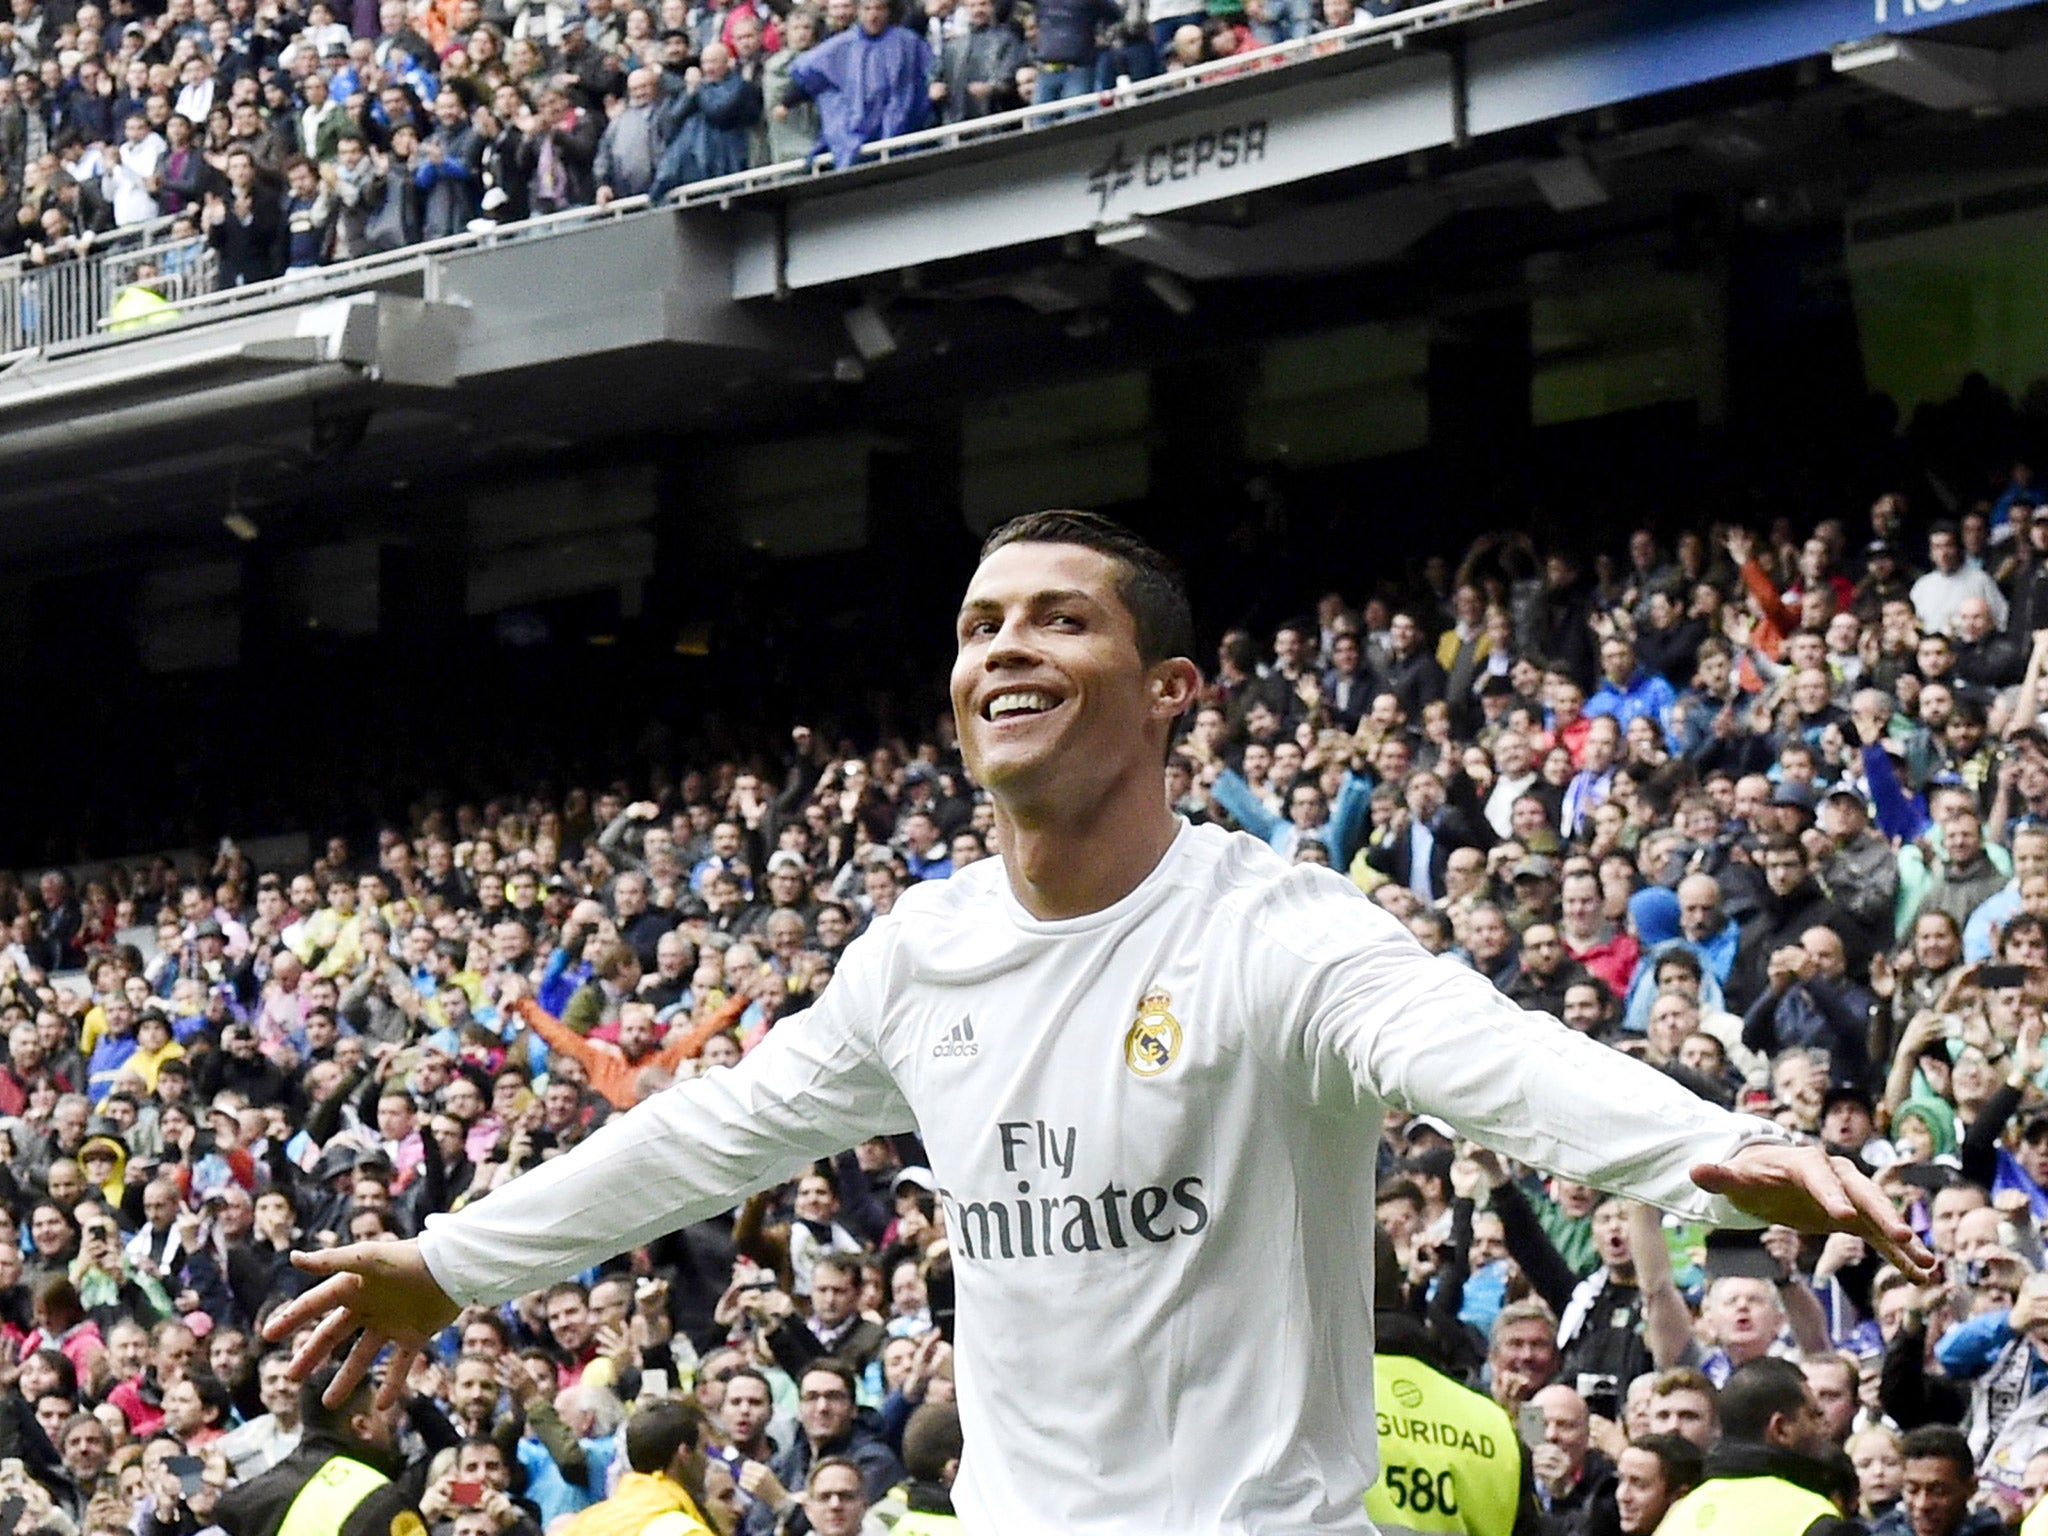 Cristiano Ronaldo's agent Jorge Mendes held talks with PSG